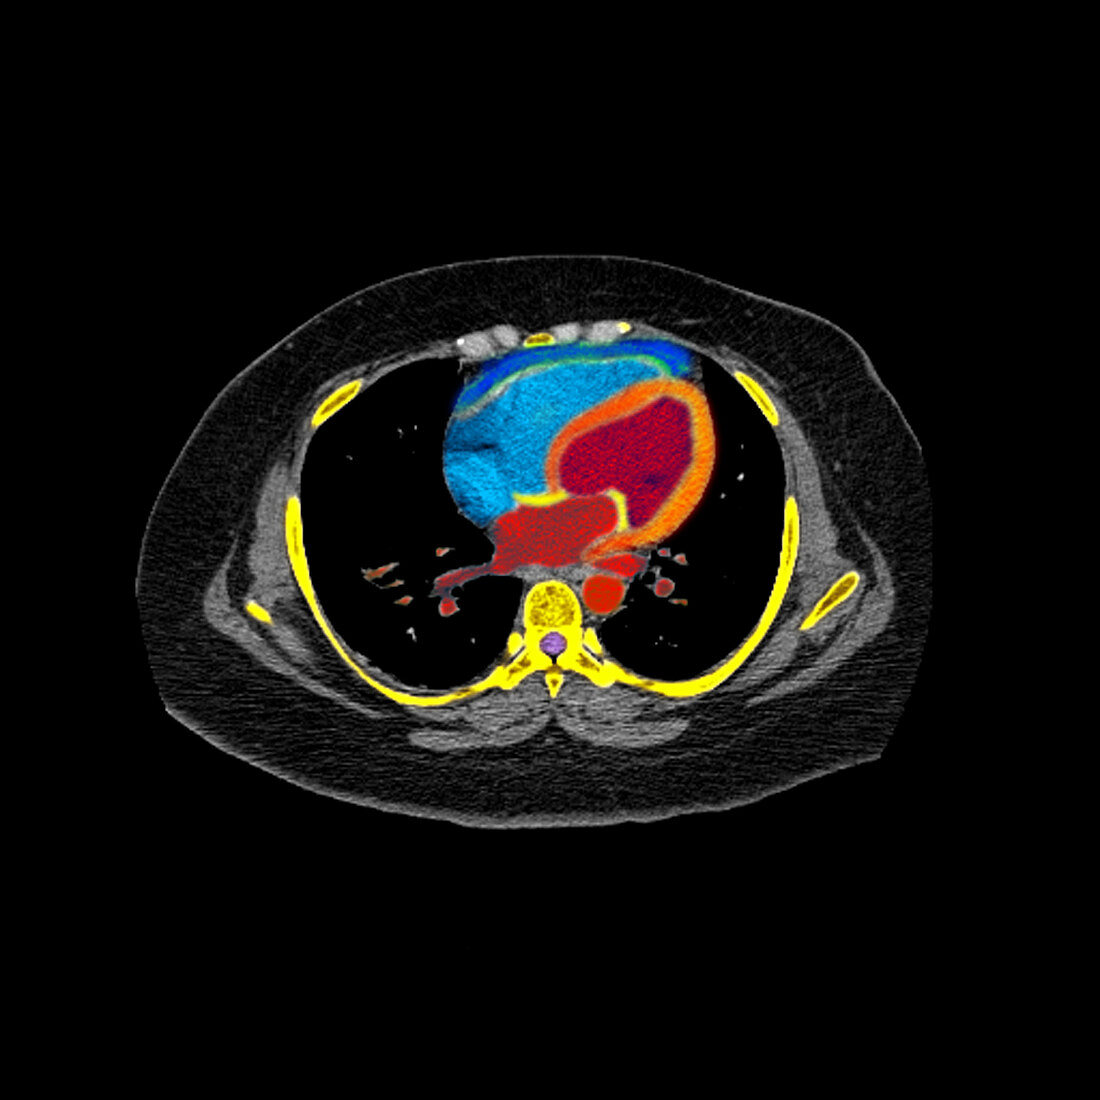 CT scan of chest through the heart